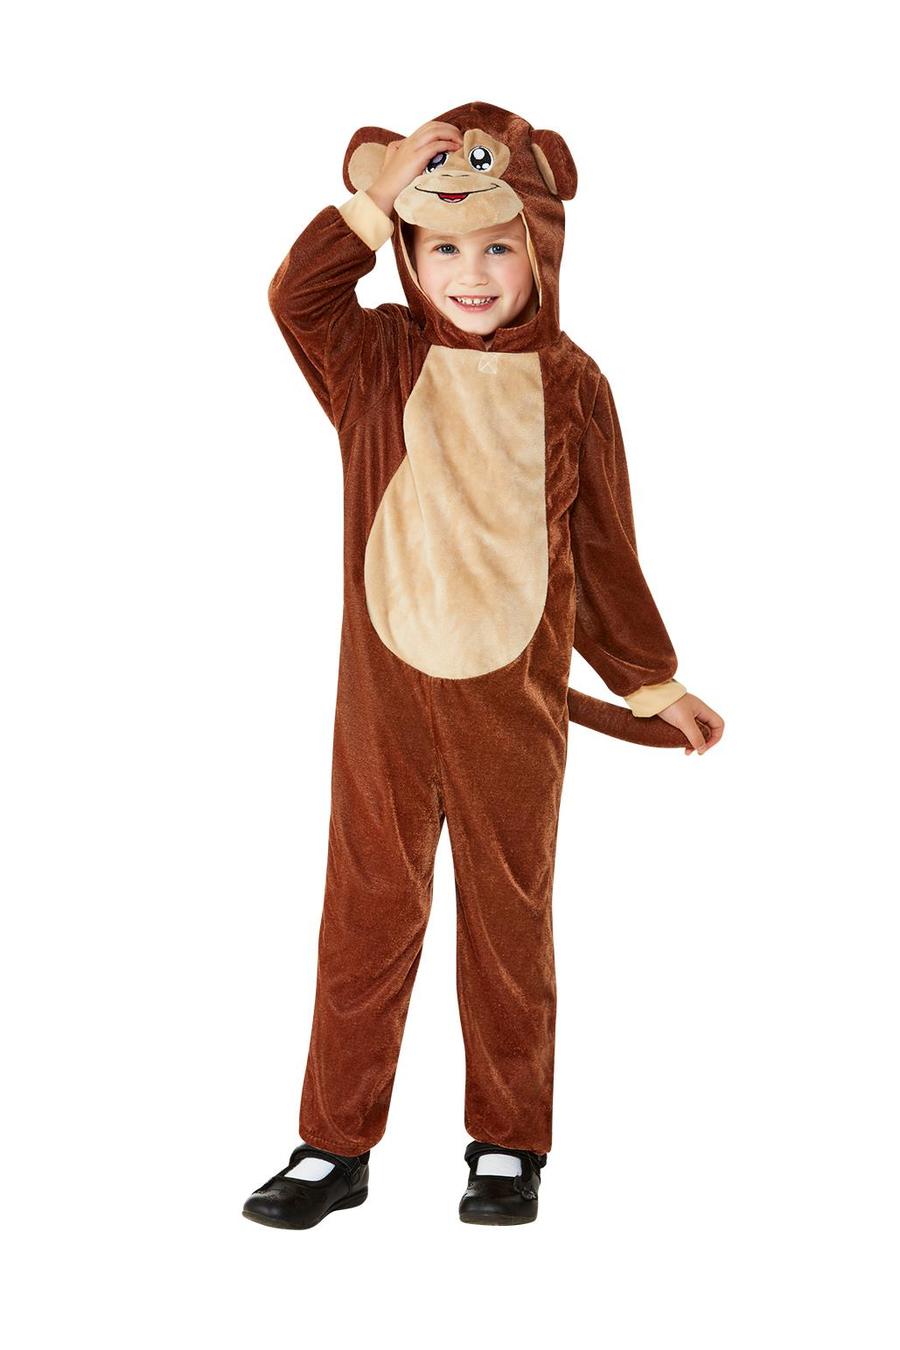 Click to view product details and reviews for Smiffys Fancy Dress Toddler Monkey Costume Fancy Dress Toddler Age 1 2.